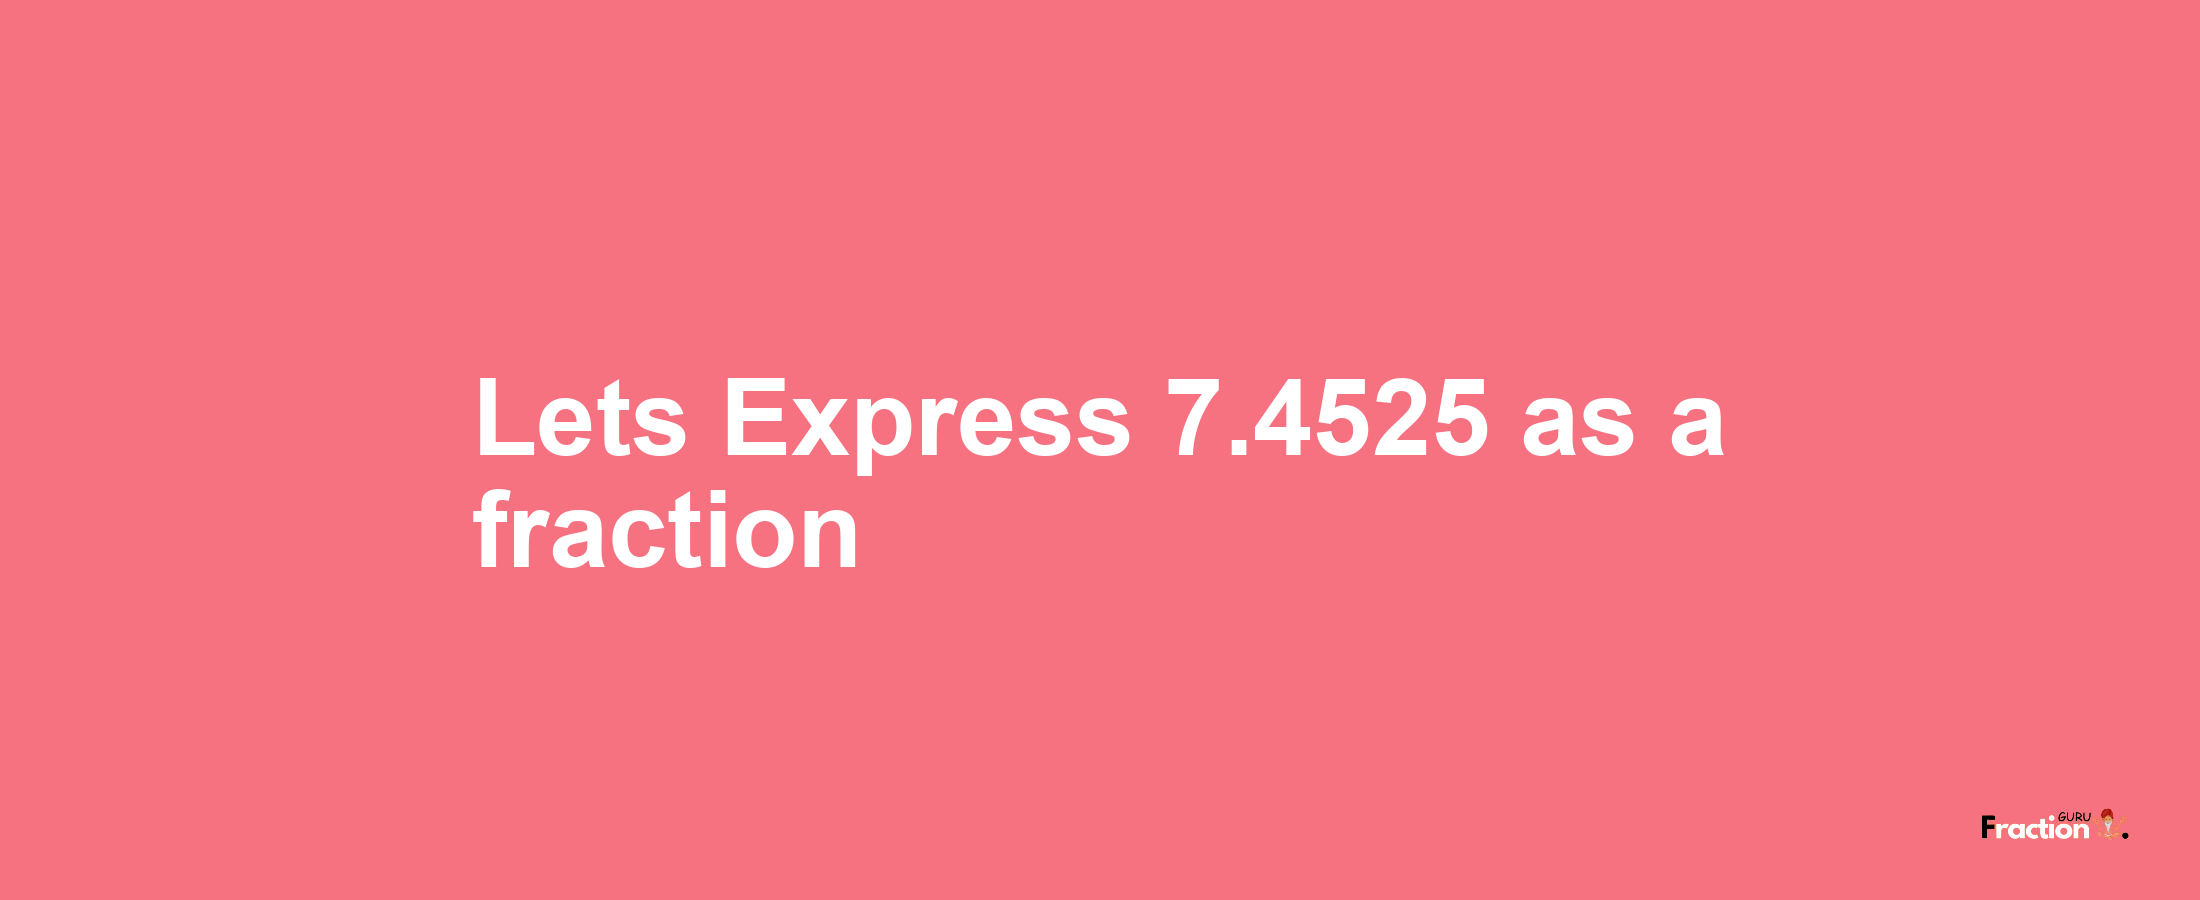 Lets Express 7.4525 as afraction